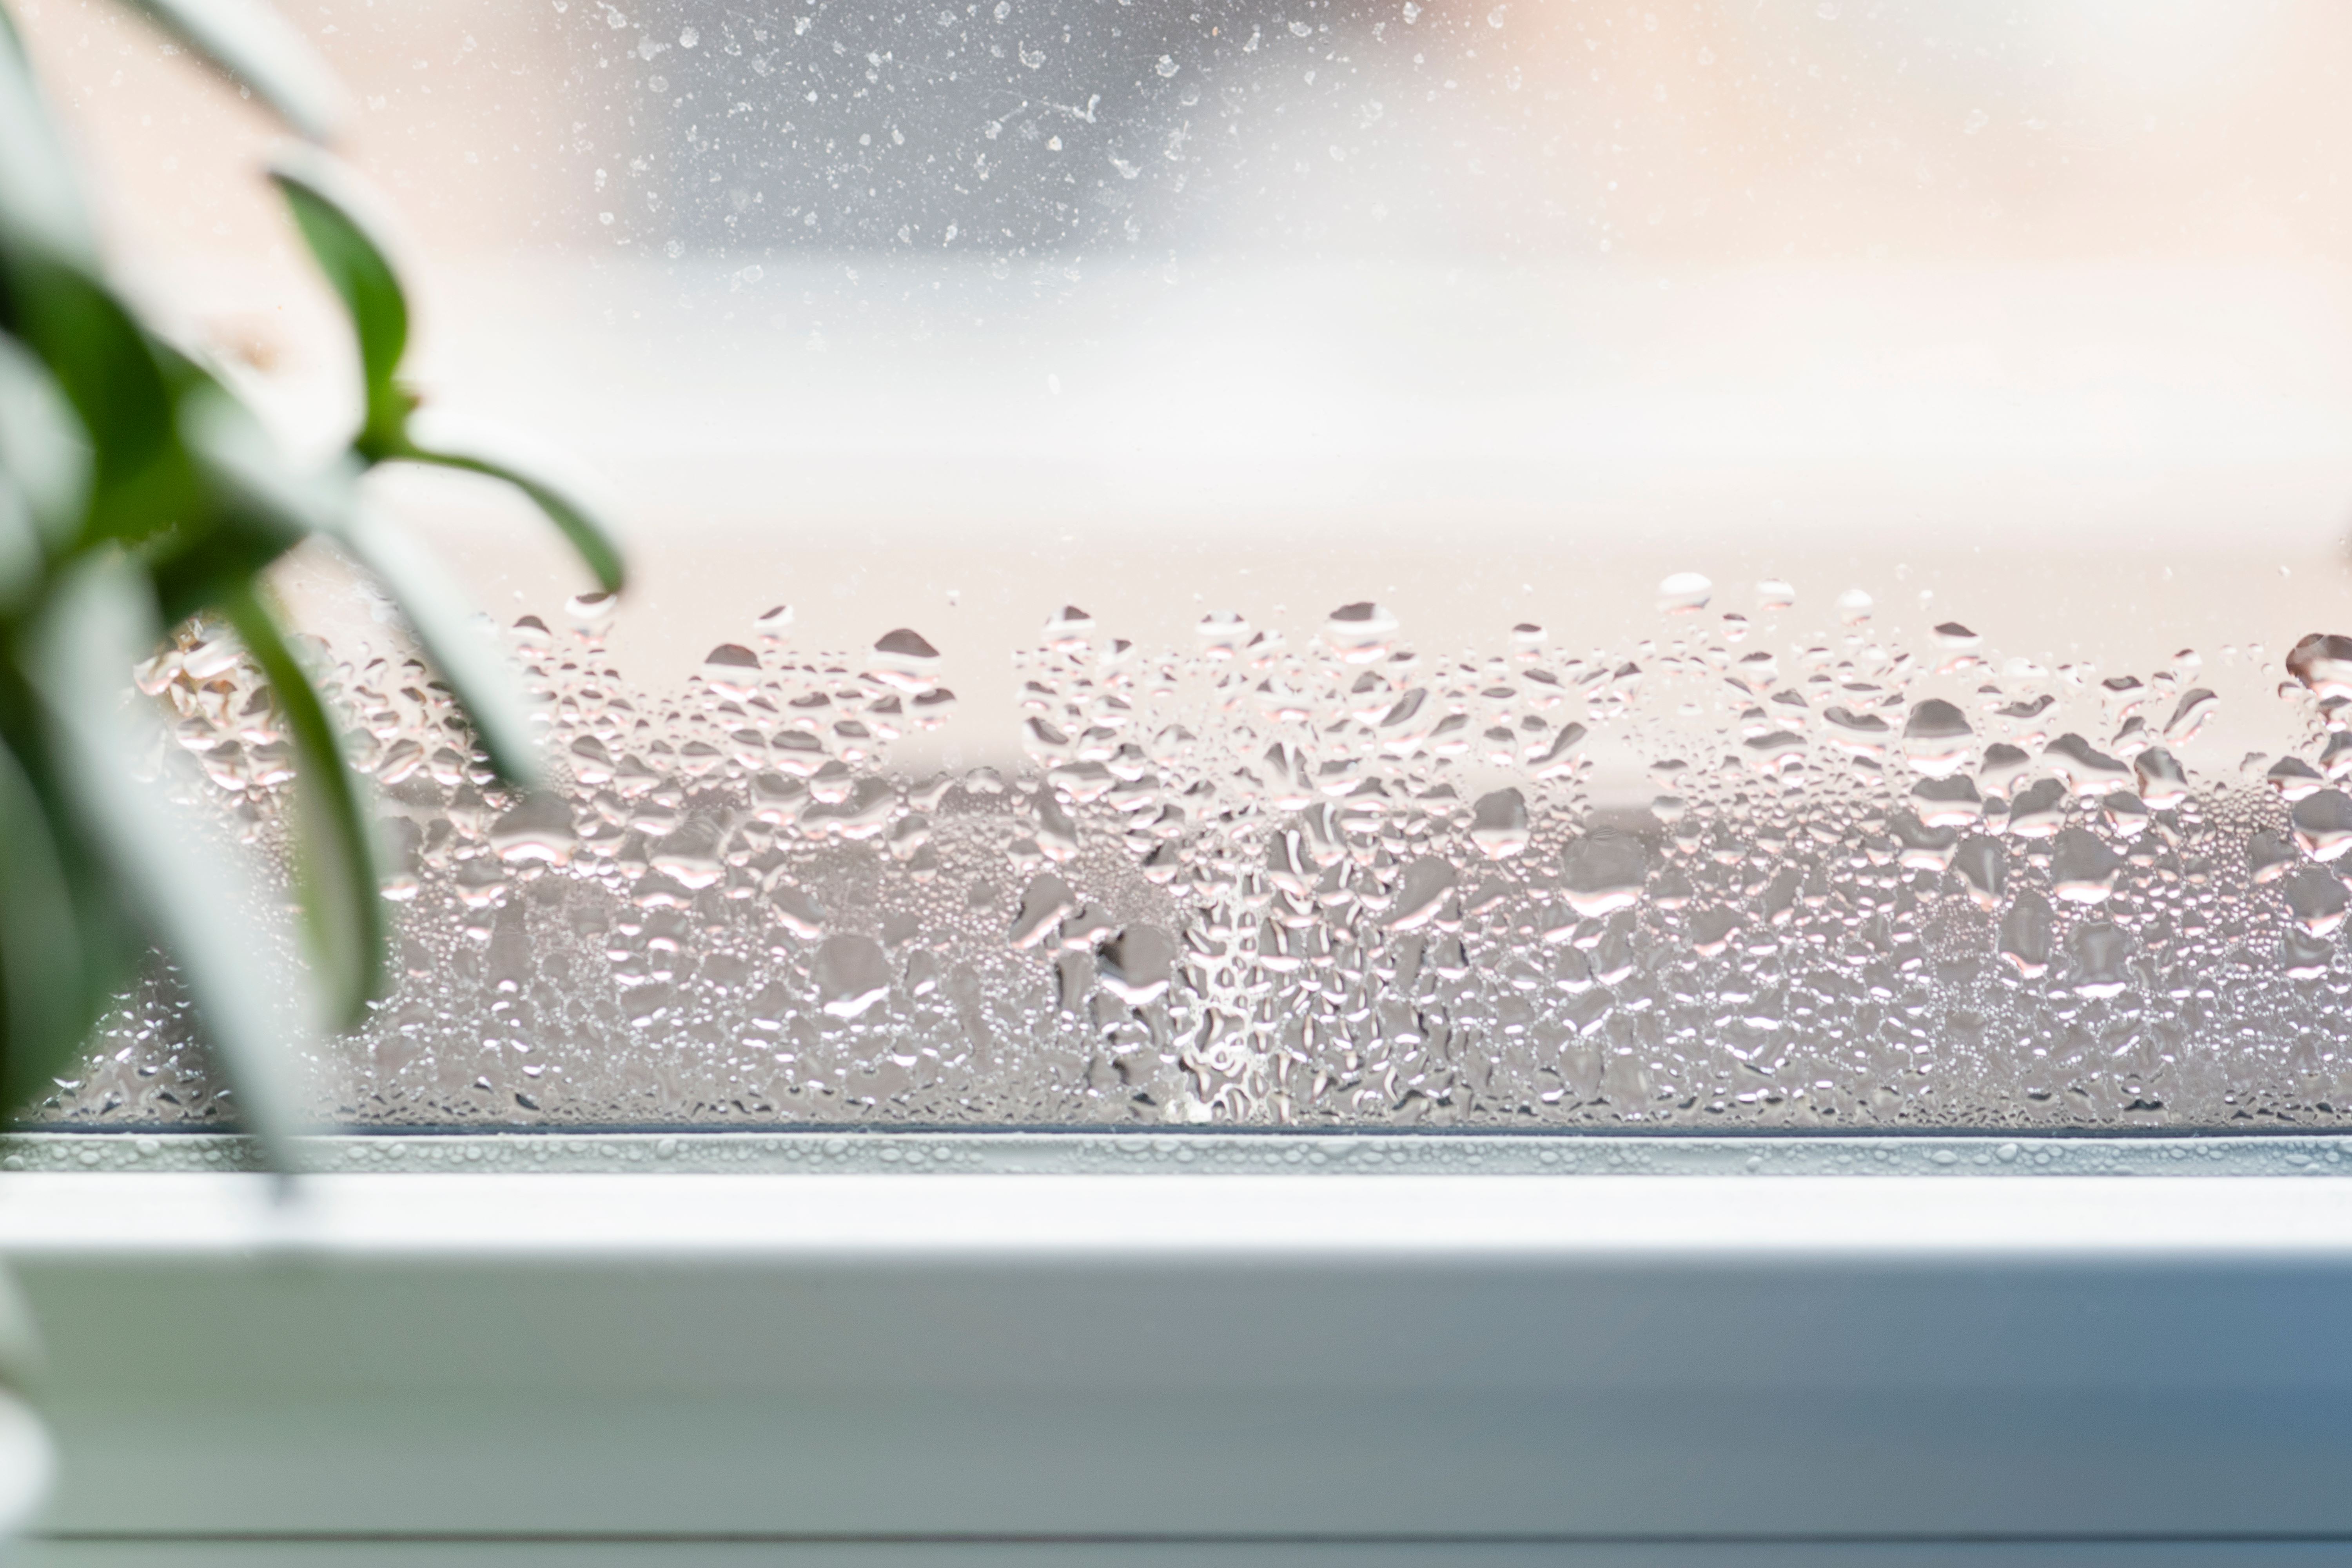 Know Your Home's Humidity Levels? Why It Matters for your Health